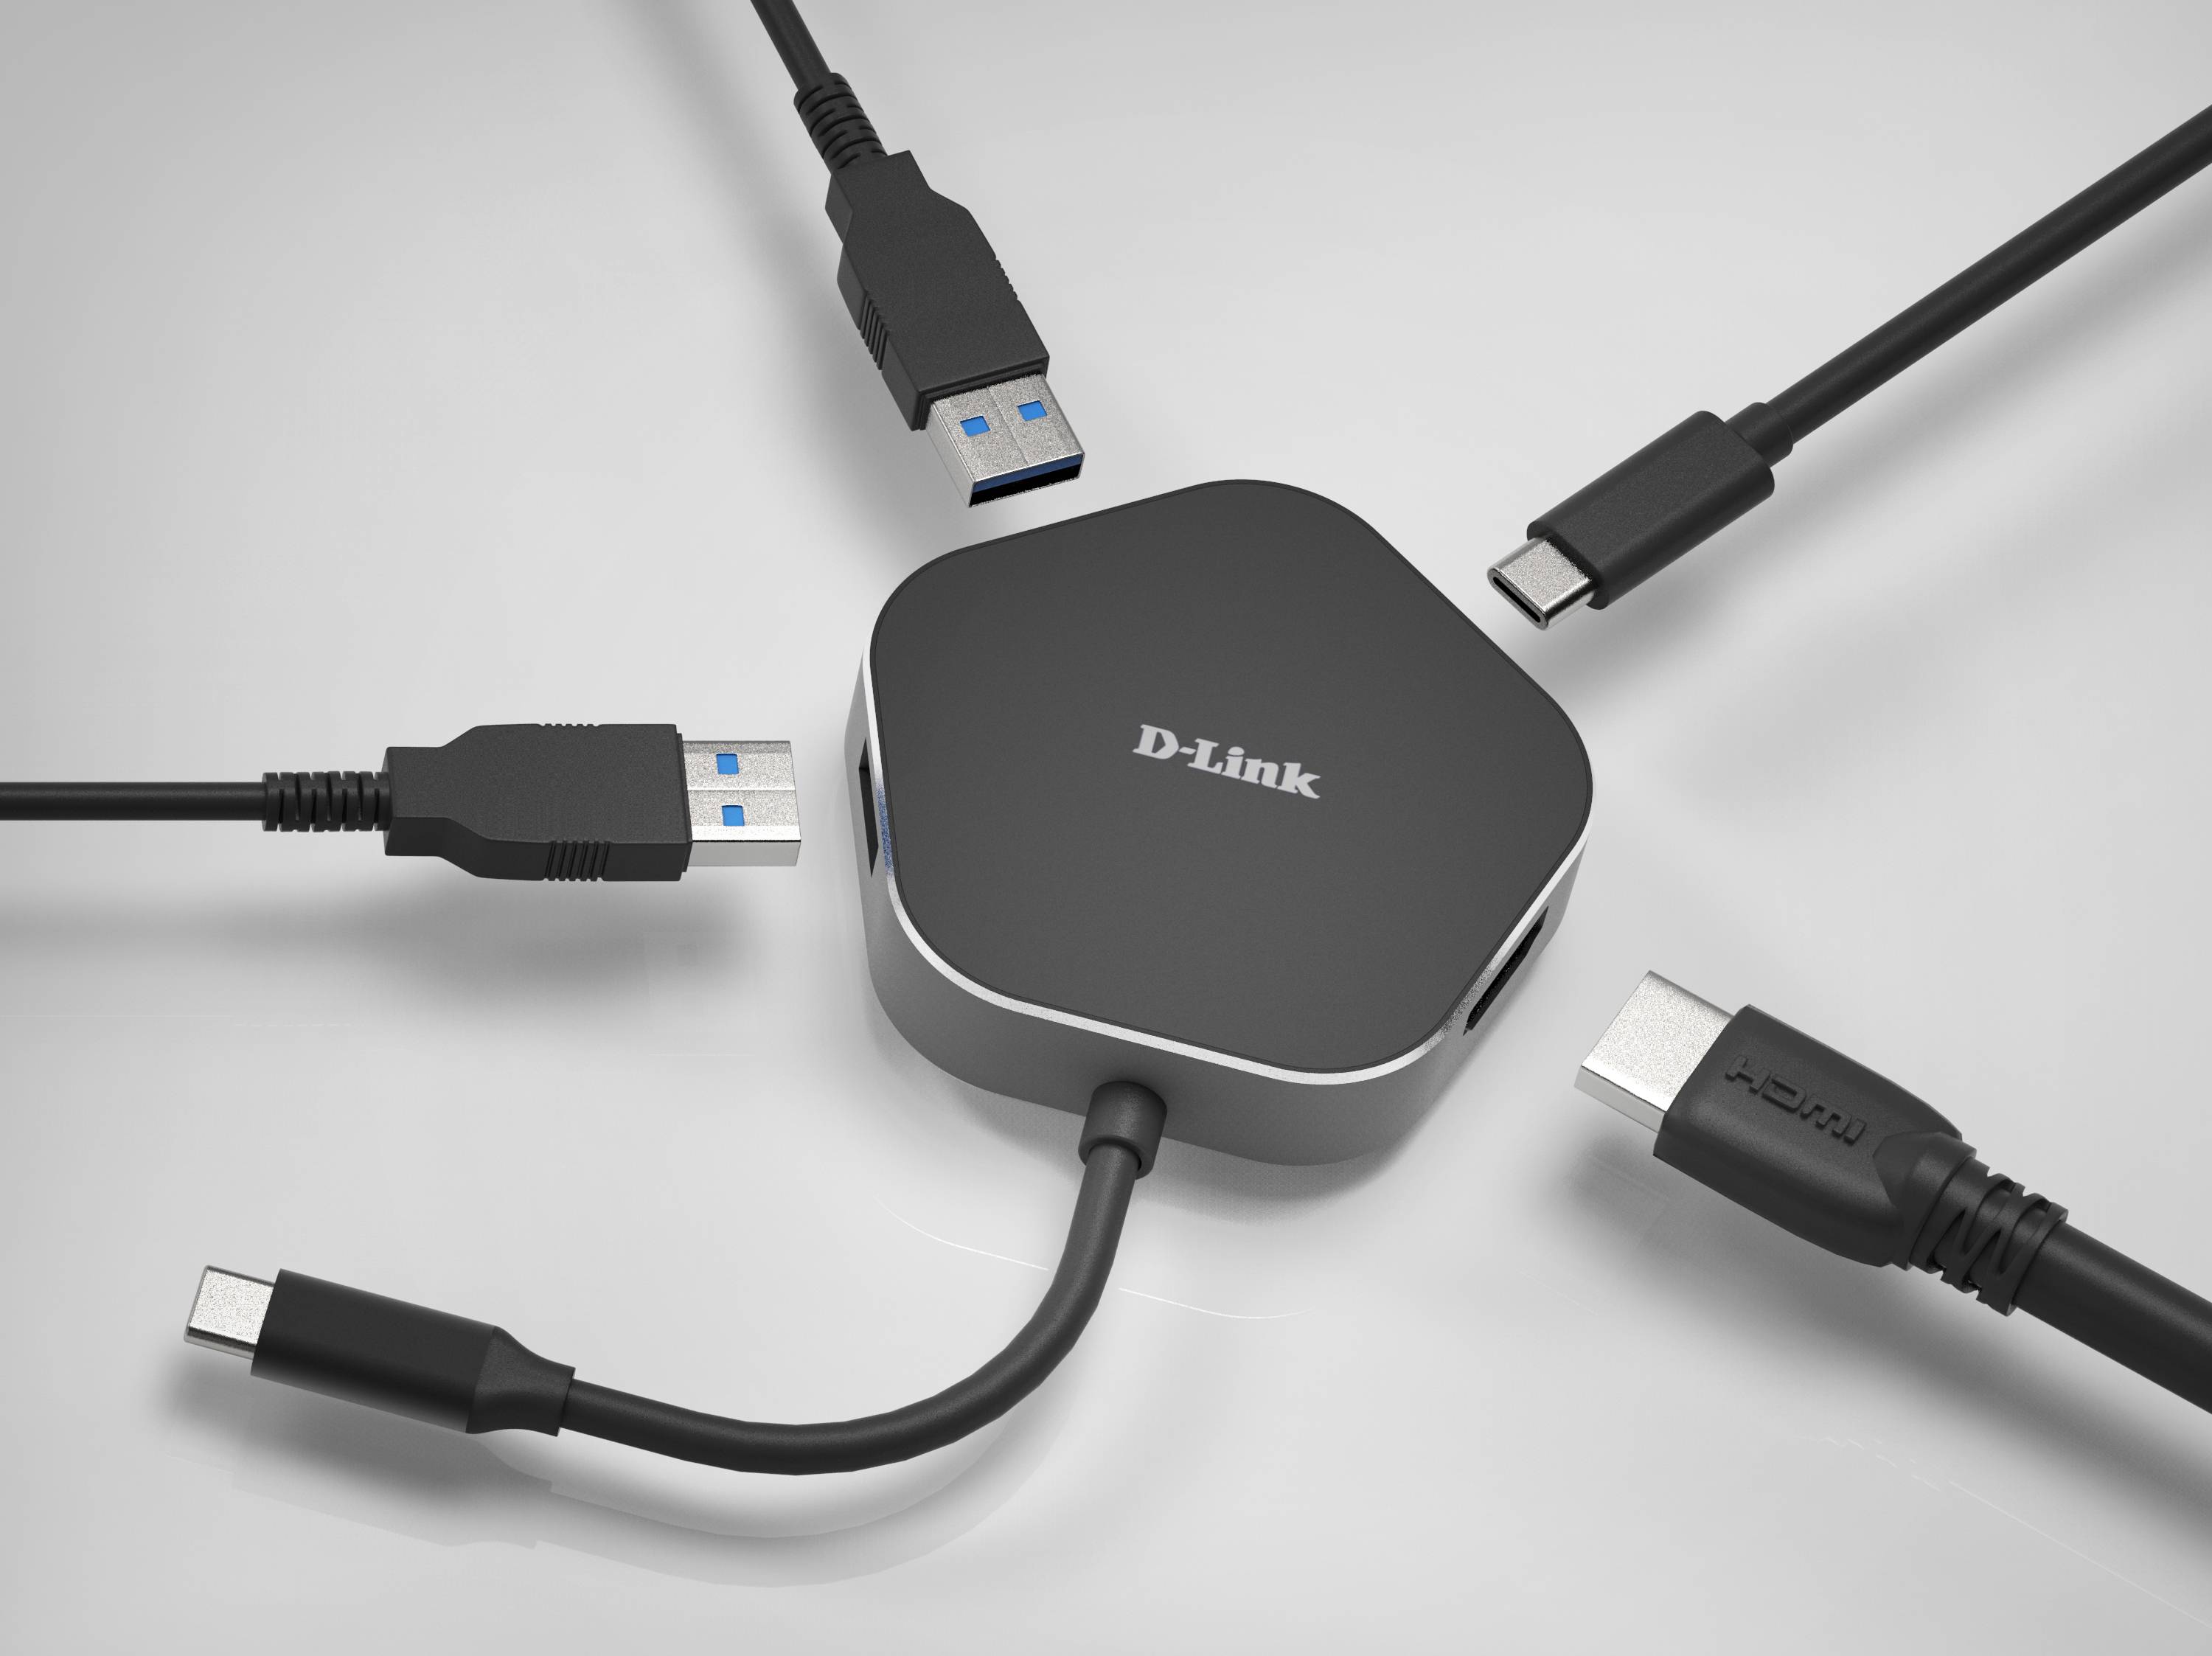 Rca Informatique - image du produit : 4-IN-1 USB-C HUB W/HDMI AND POWER DELIVERY